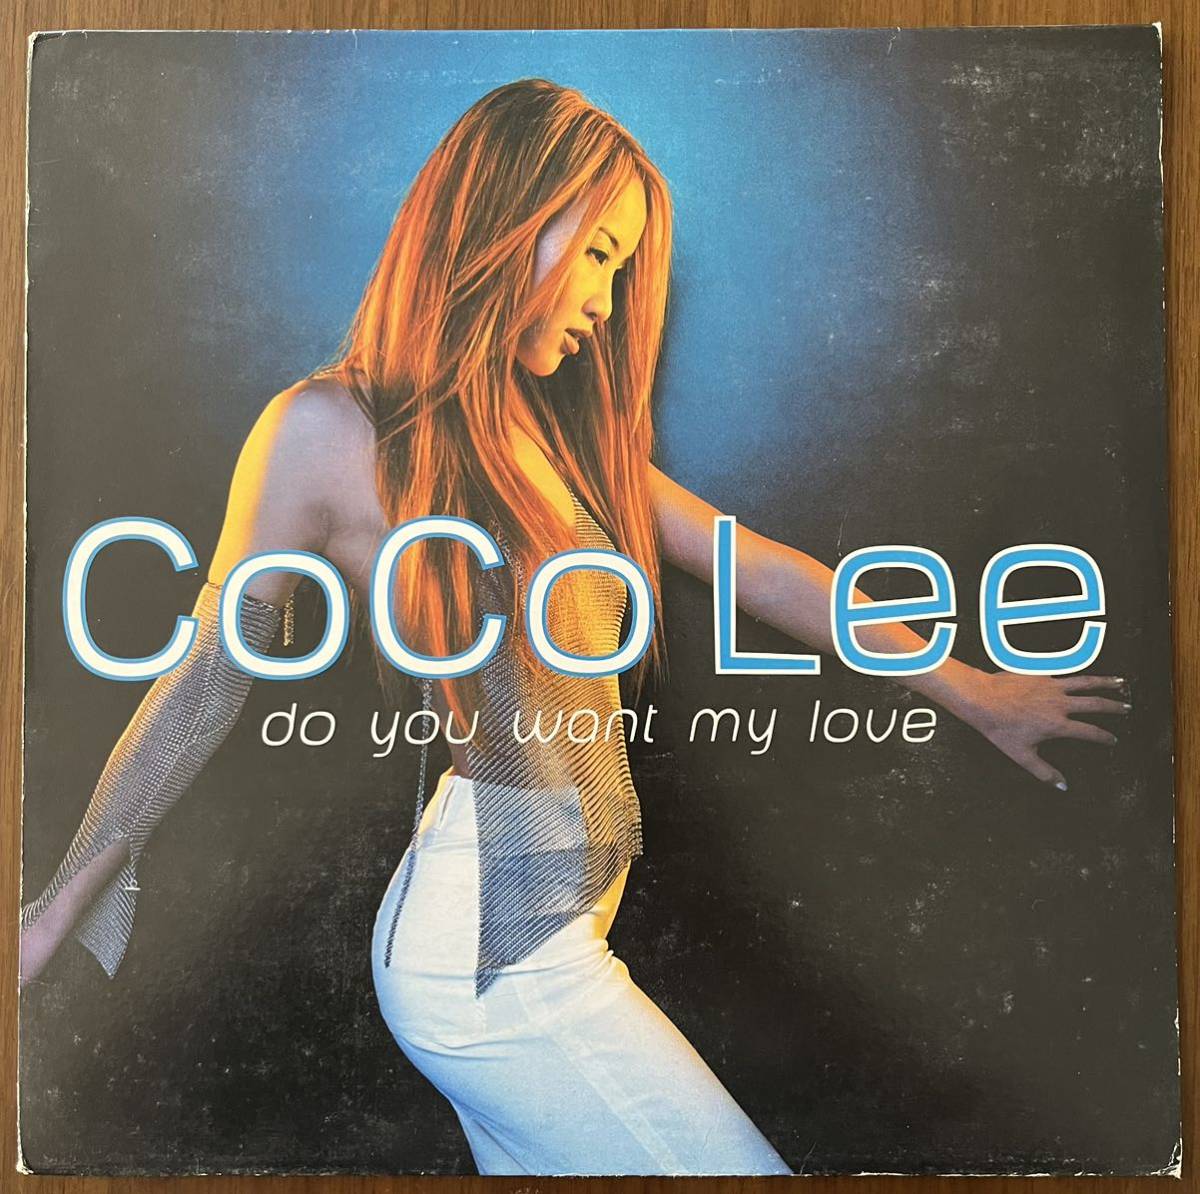 Coco Lee ココ リー 李王文 DO YOU WANT MY LOVE レコード LP 12インチ R&B オランダ盤 holand press house remix hex hector_画像1